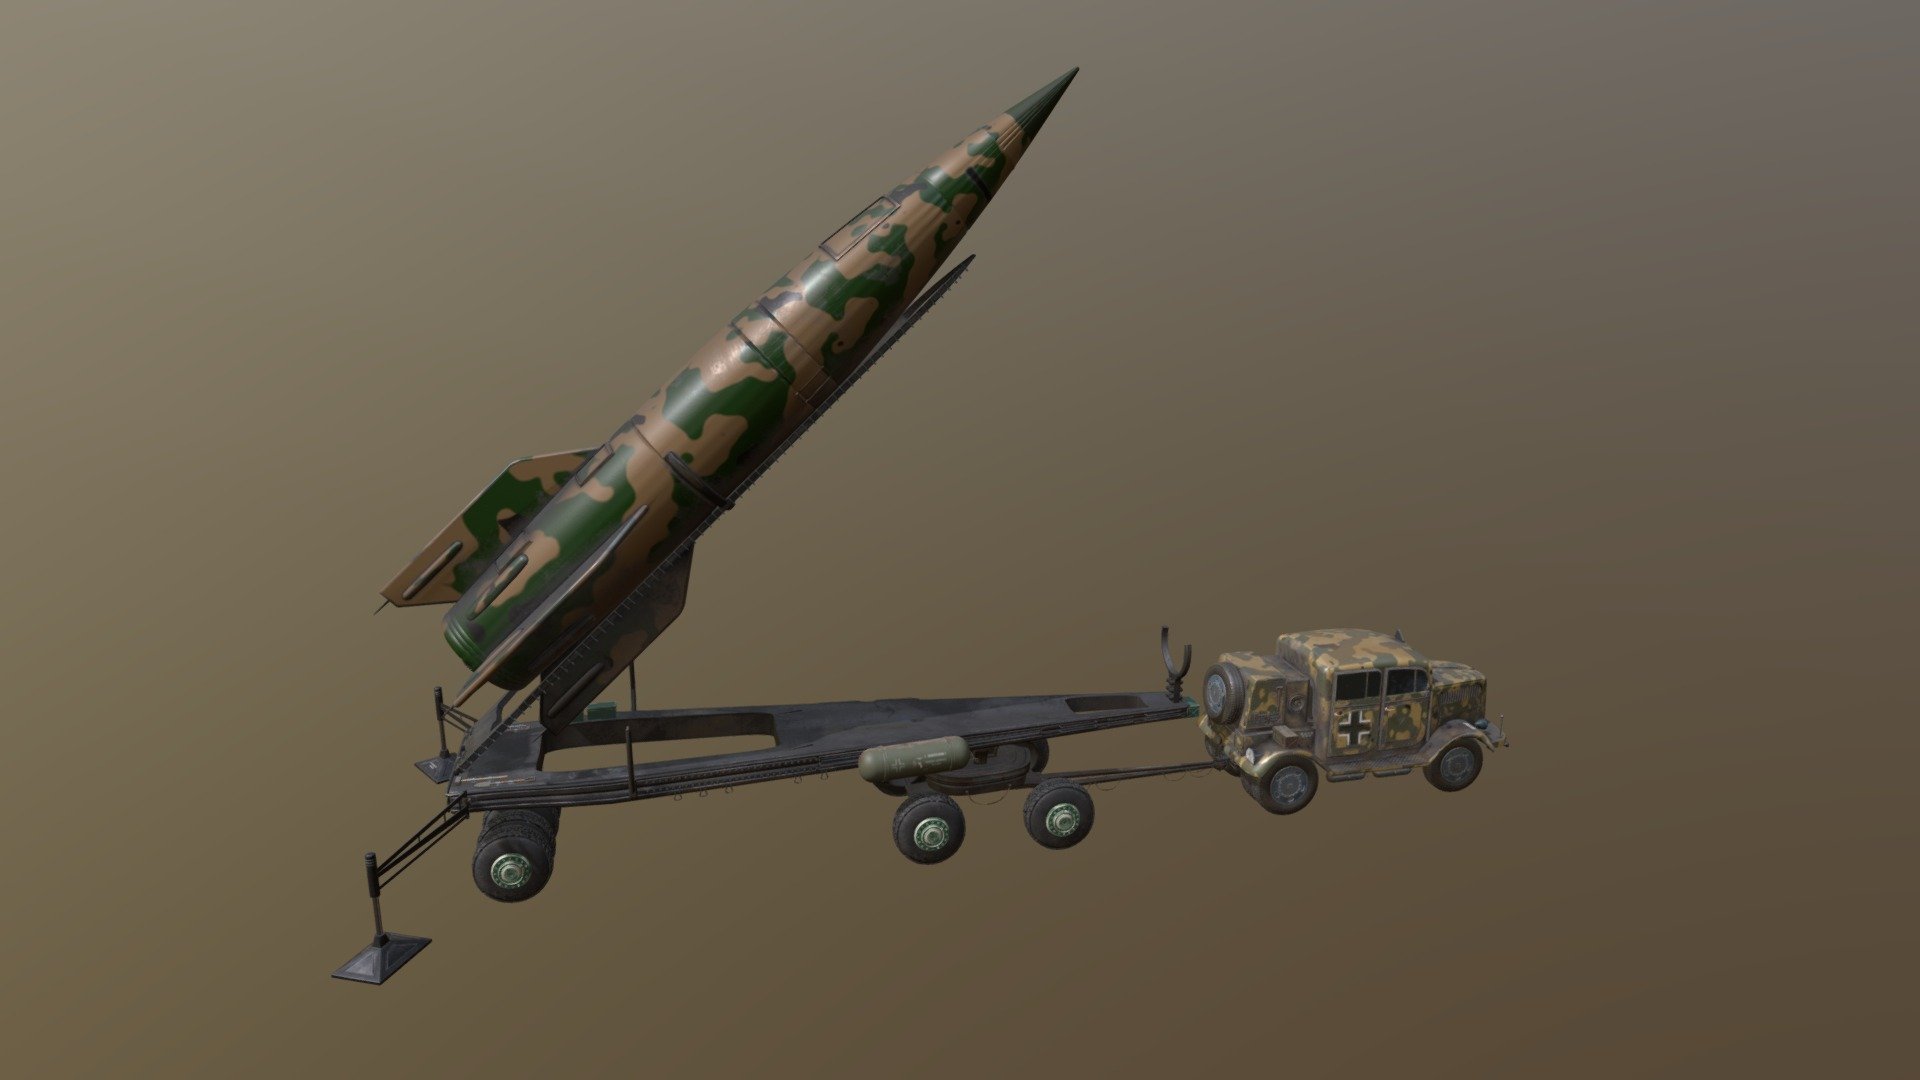 Opel Blitz V2 version + V2 rocket + ramp

Opel Blitz Special V2 rocket truck wooden cammo.

Game ready model for unreal, unity engine. For scenes, videos, games.
Wheels with origins for animations
2k PBR  textures in substance painter
gizmos ready

V2 rocket with ramp for Opel Blitz
plug and play
gizmos ready for animation
All handmade textures too Substance painter.
Easy to make own game 3d model